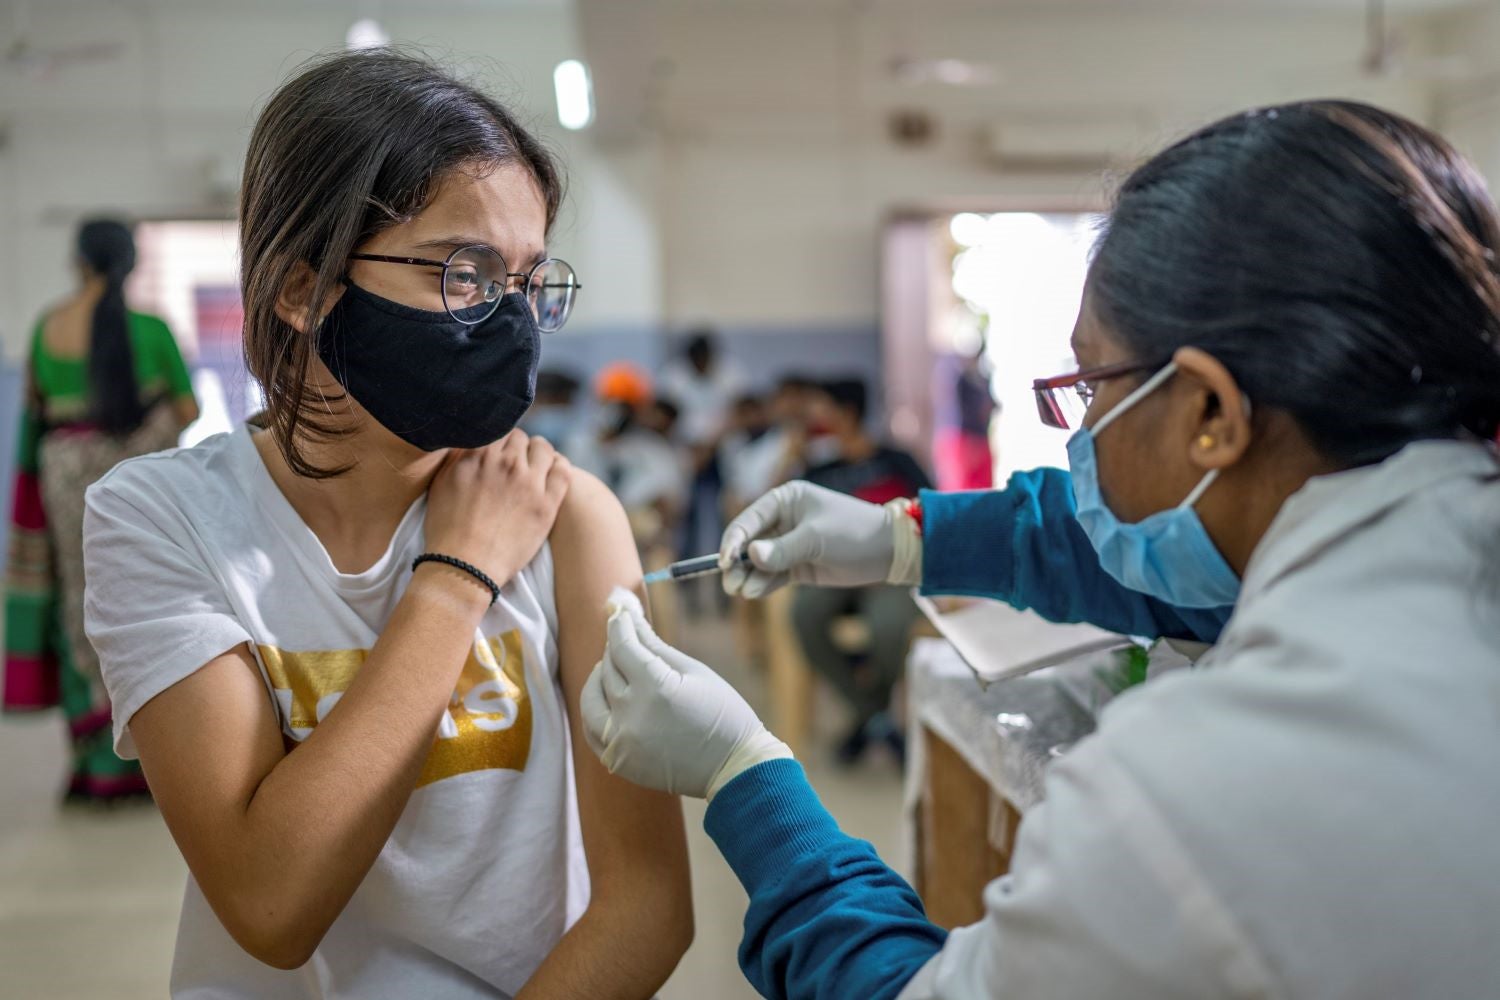 Female receives a vaccination in her arm.